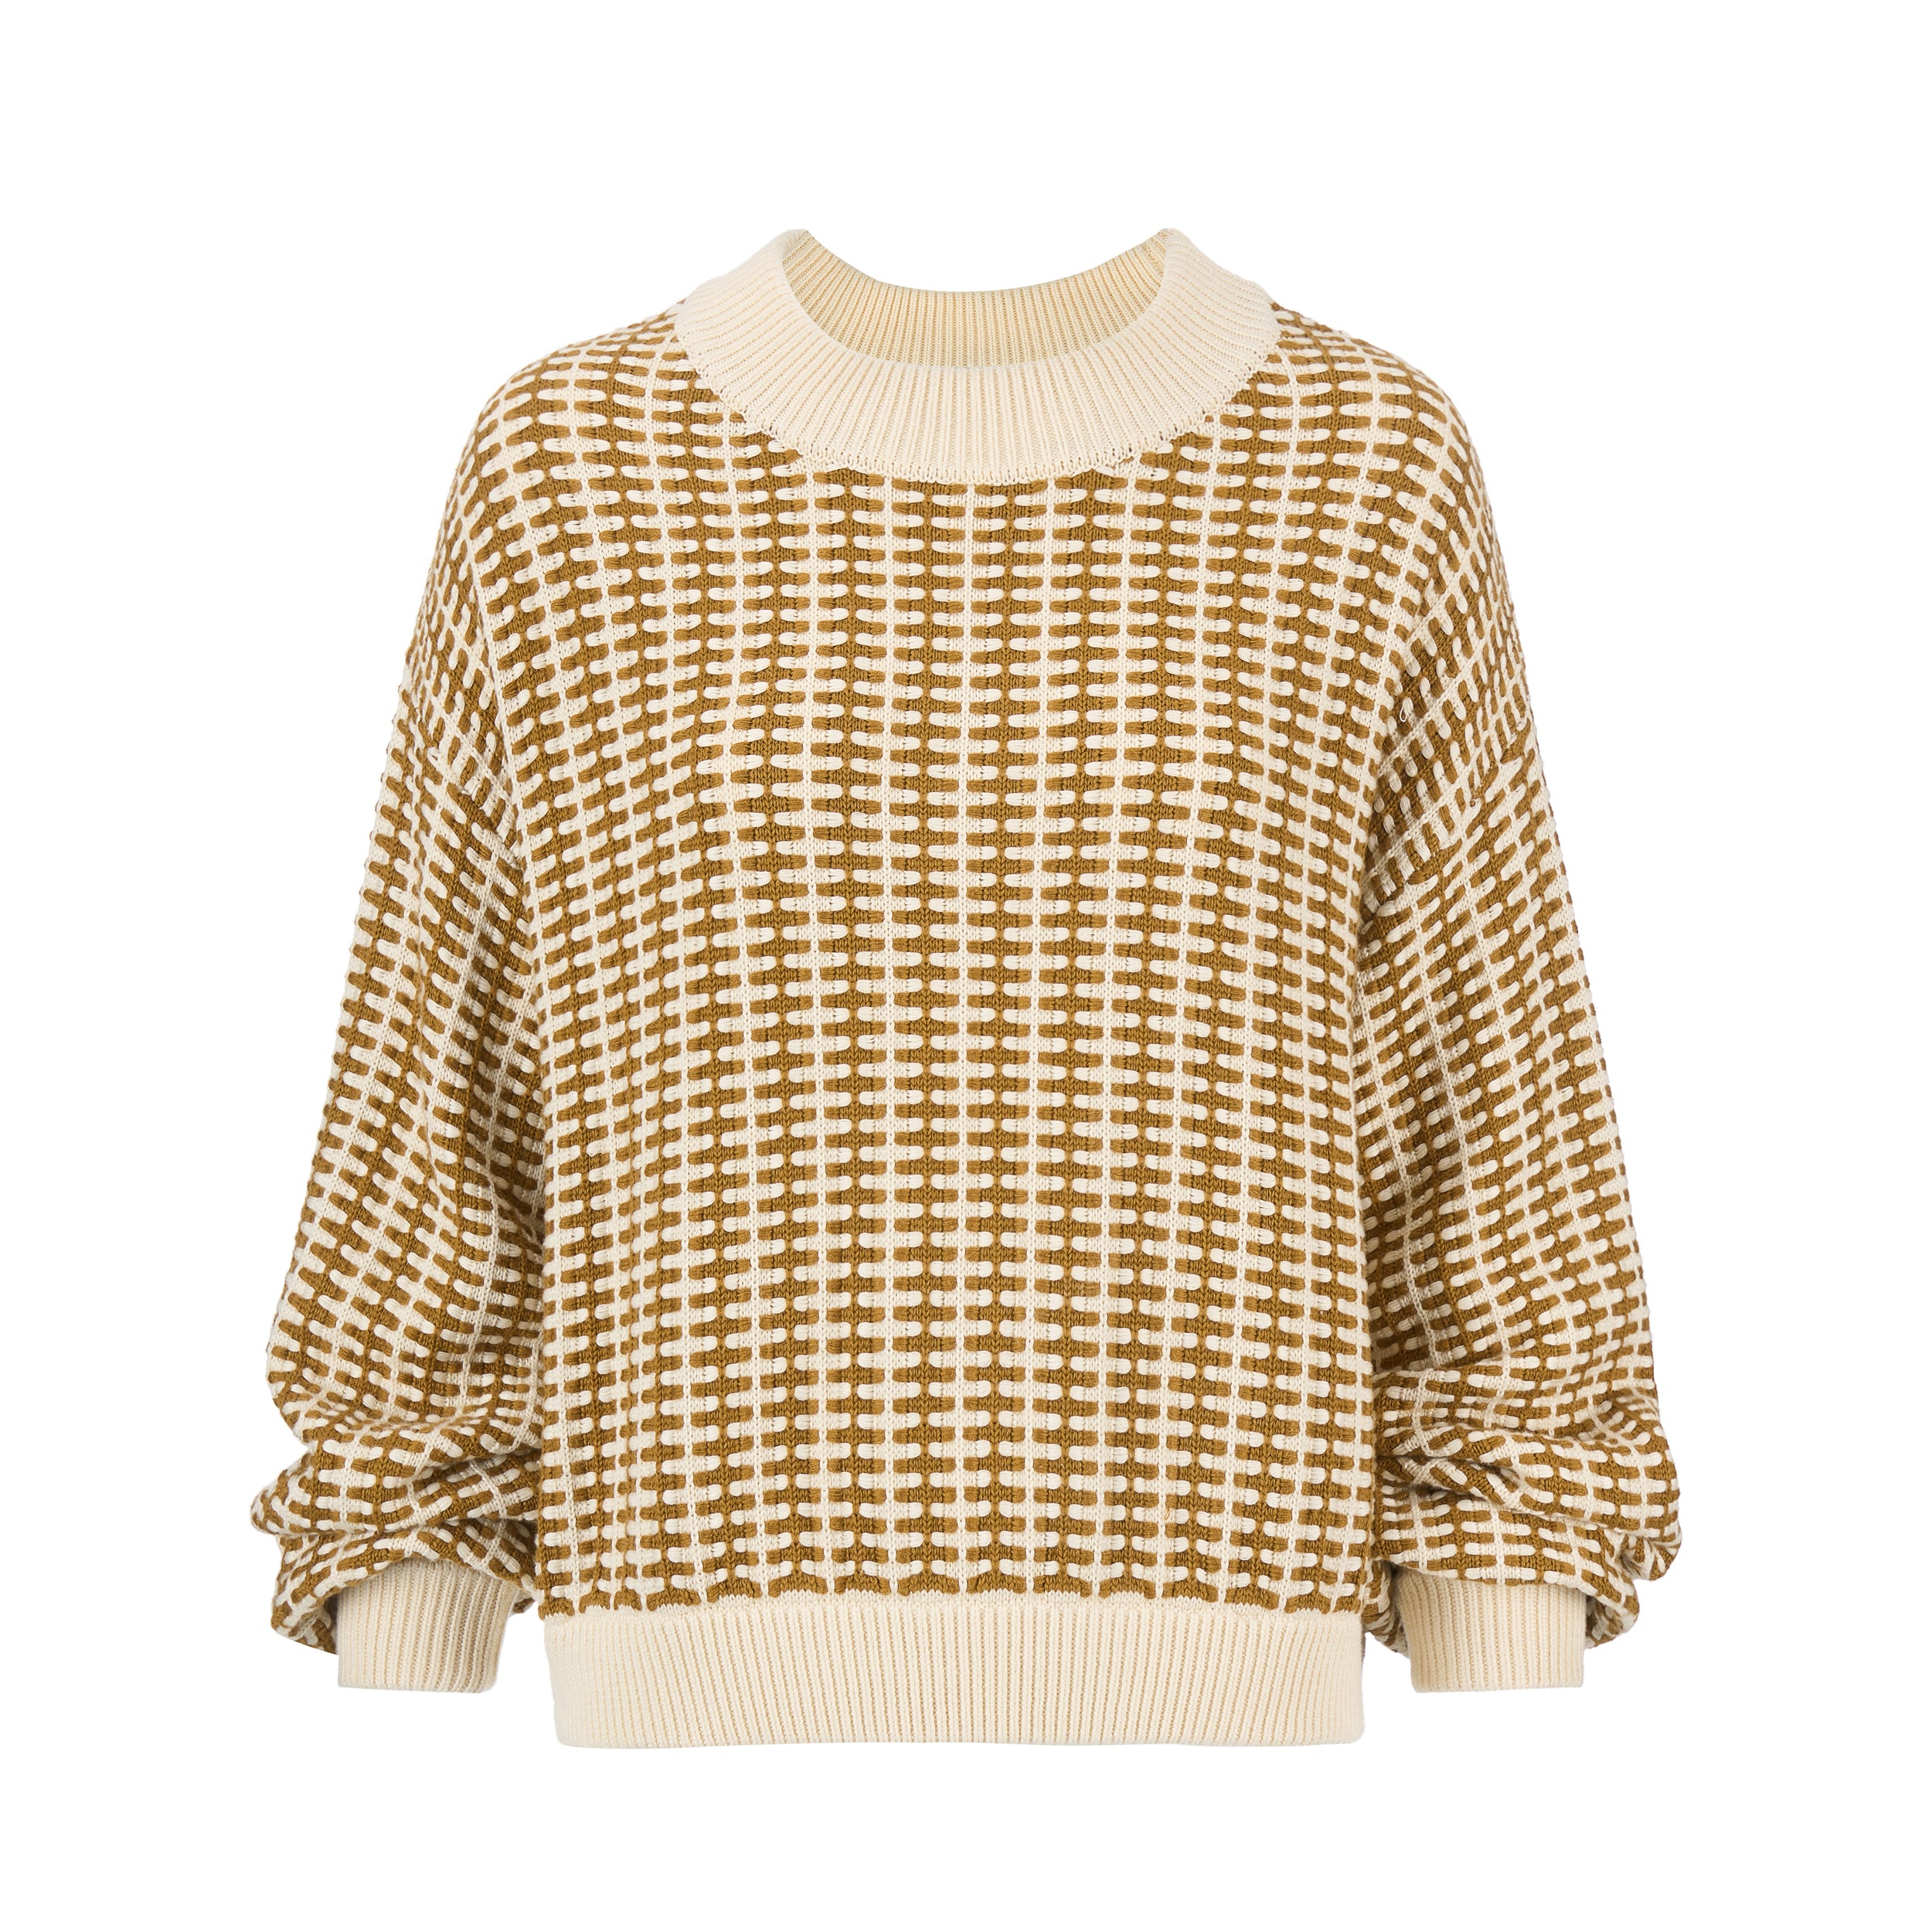 THE INES KNIT JUMPER